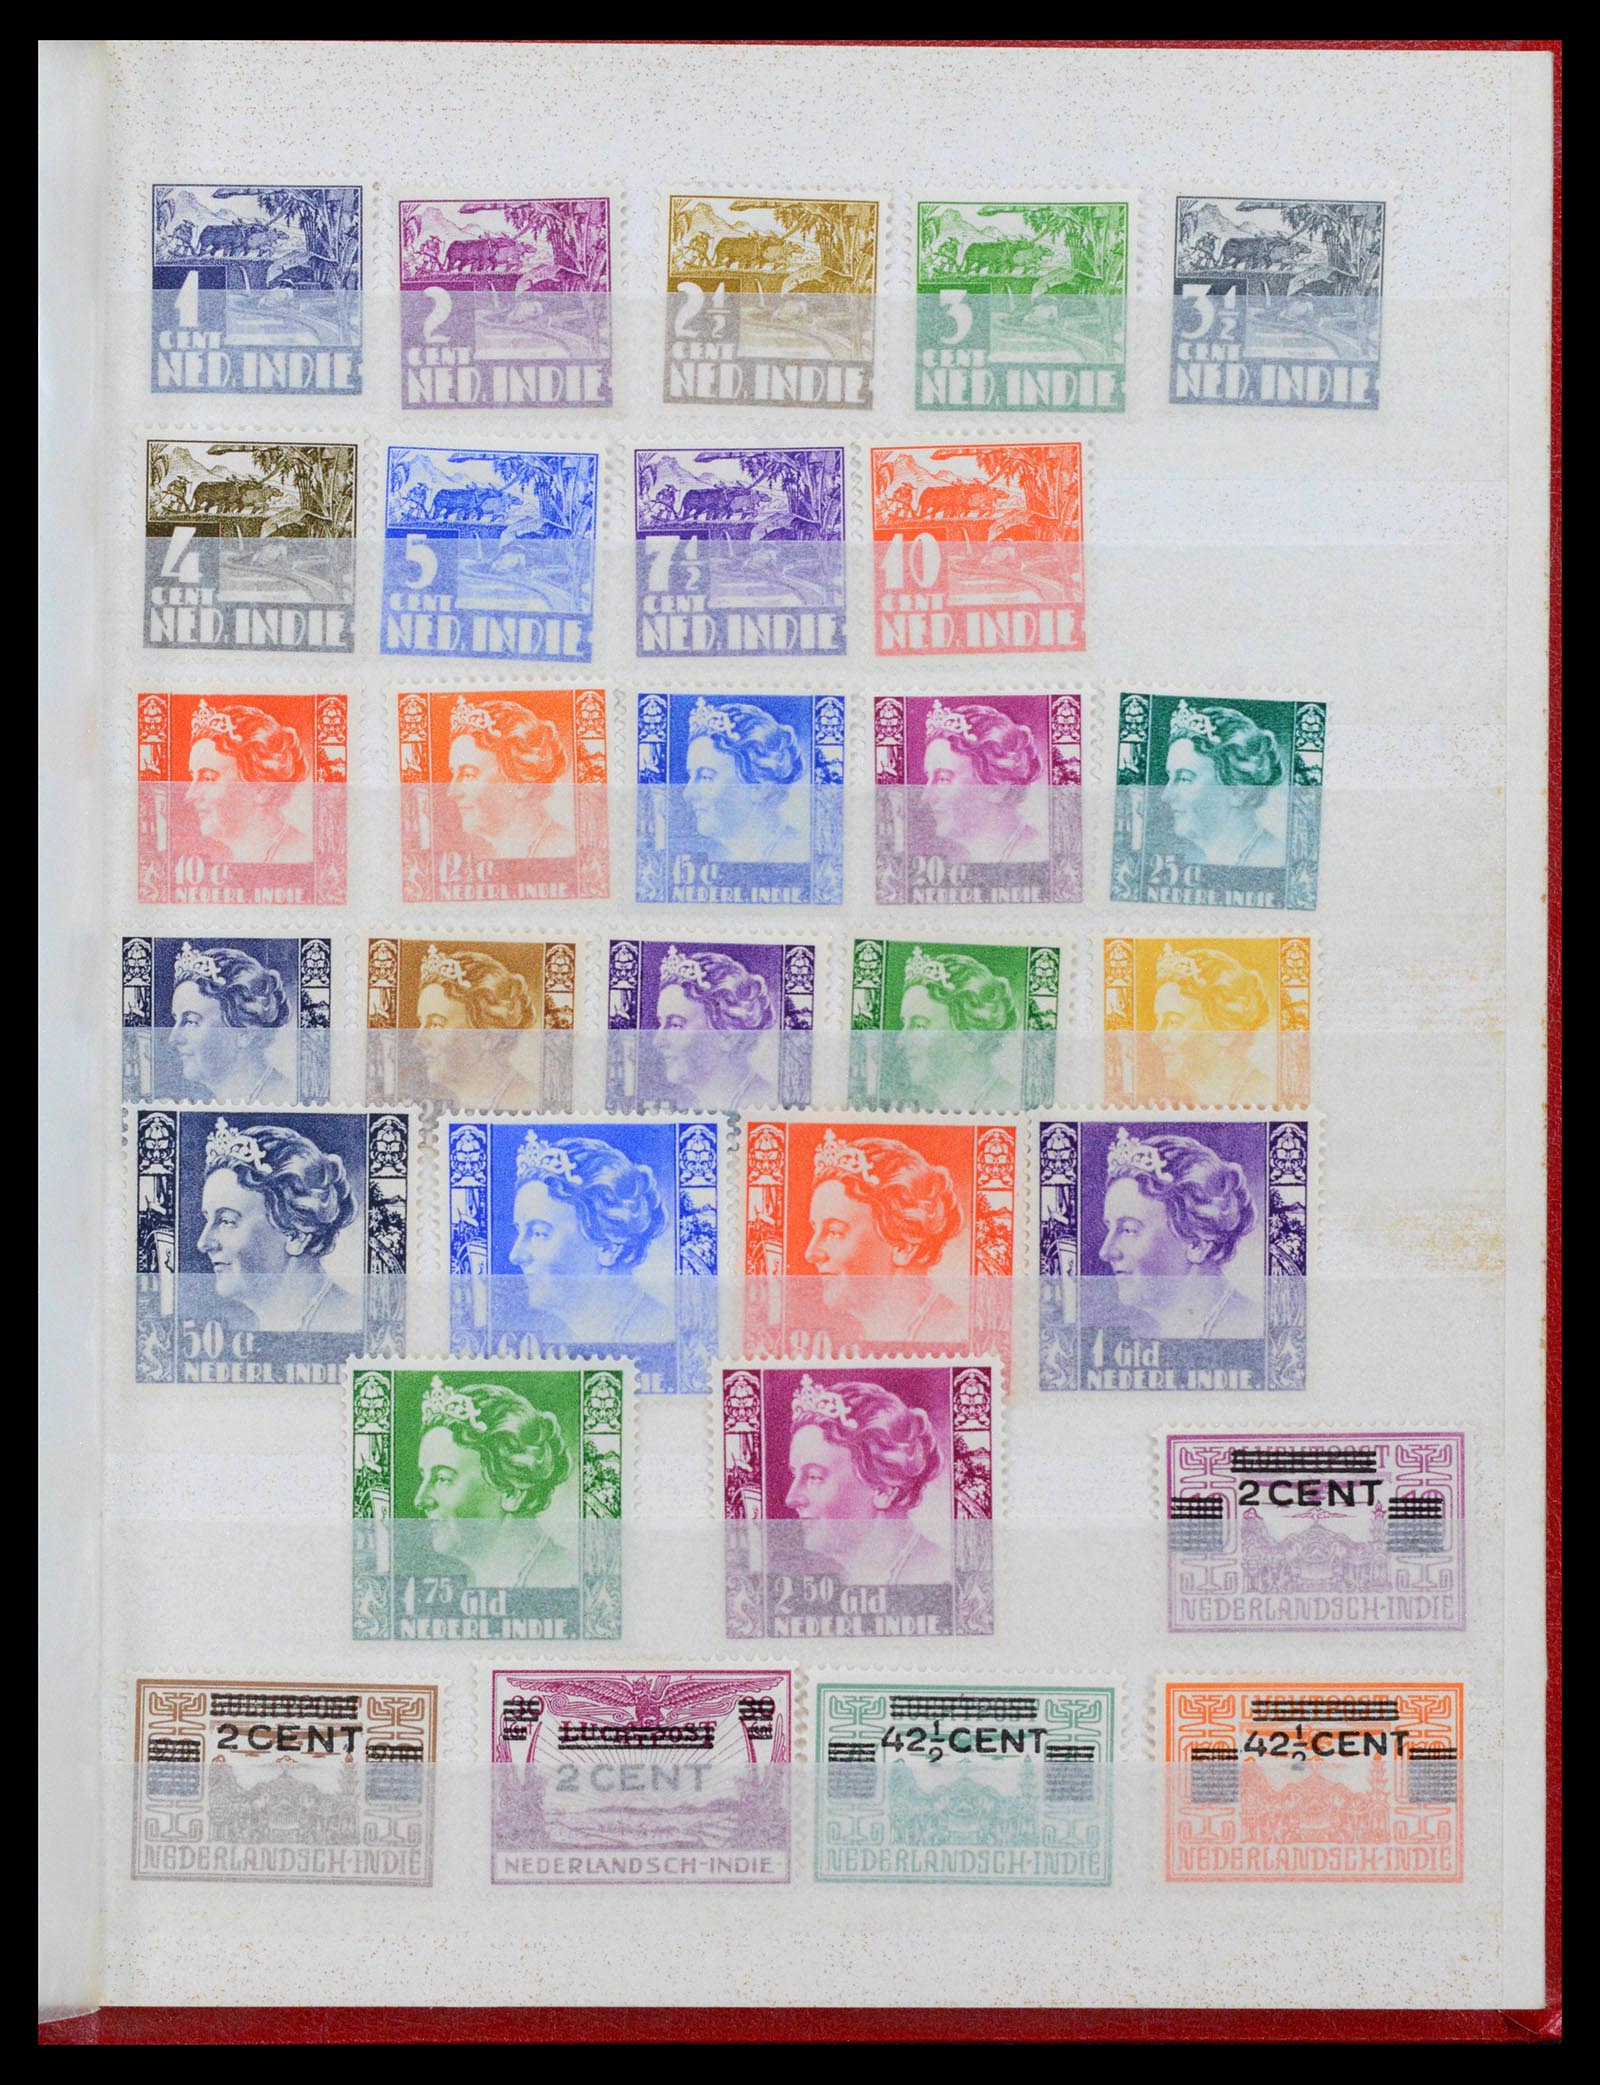 39359 0007 - Stamp collection 39359 Dutch east Indies 1864-1948.